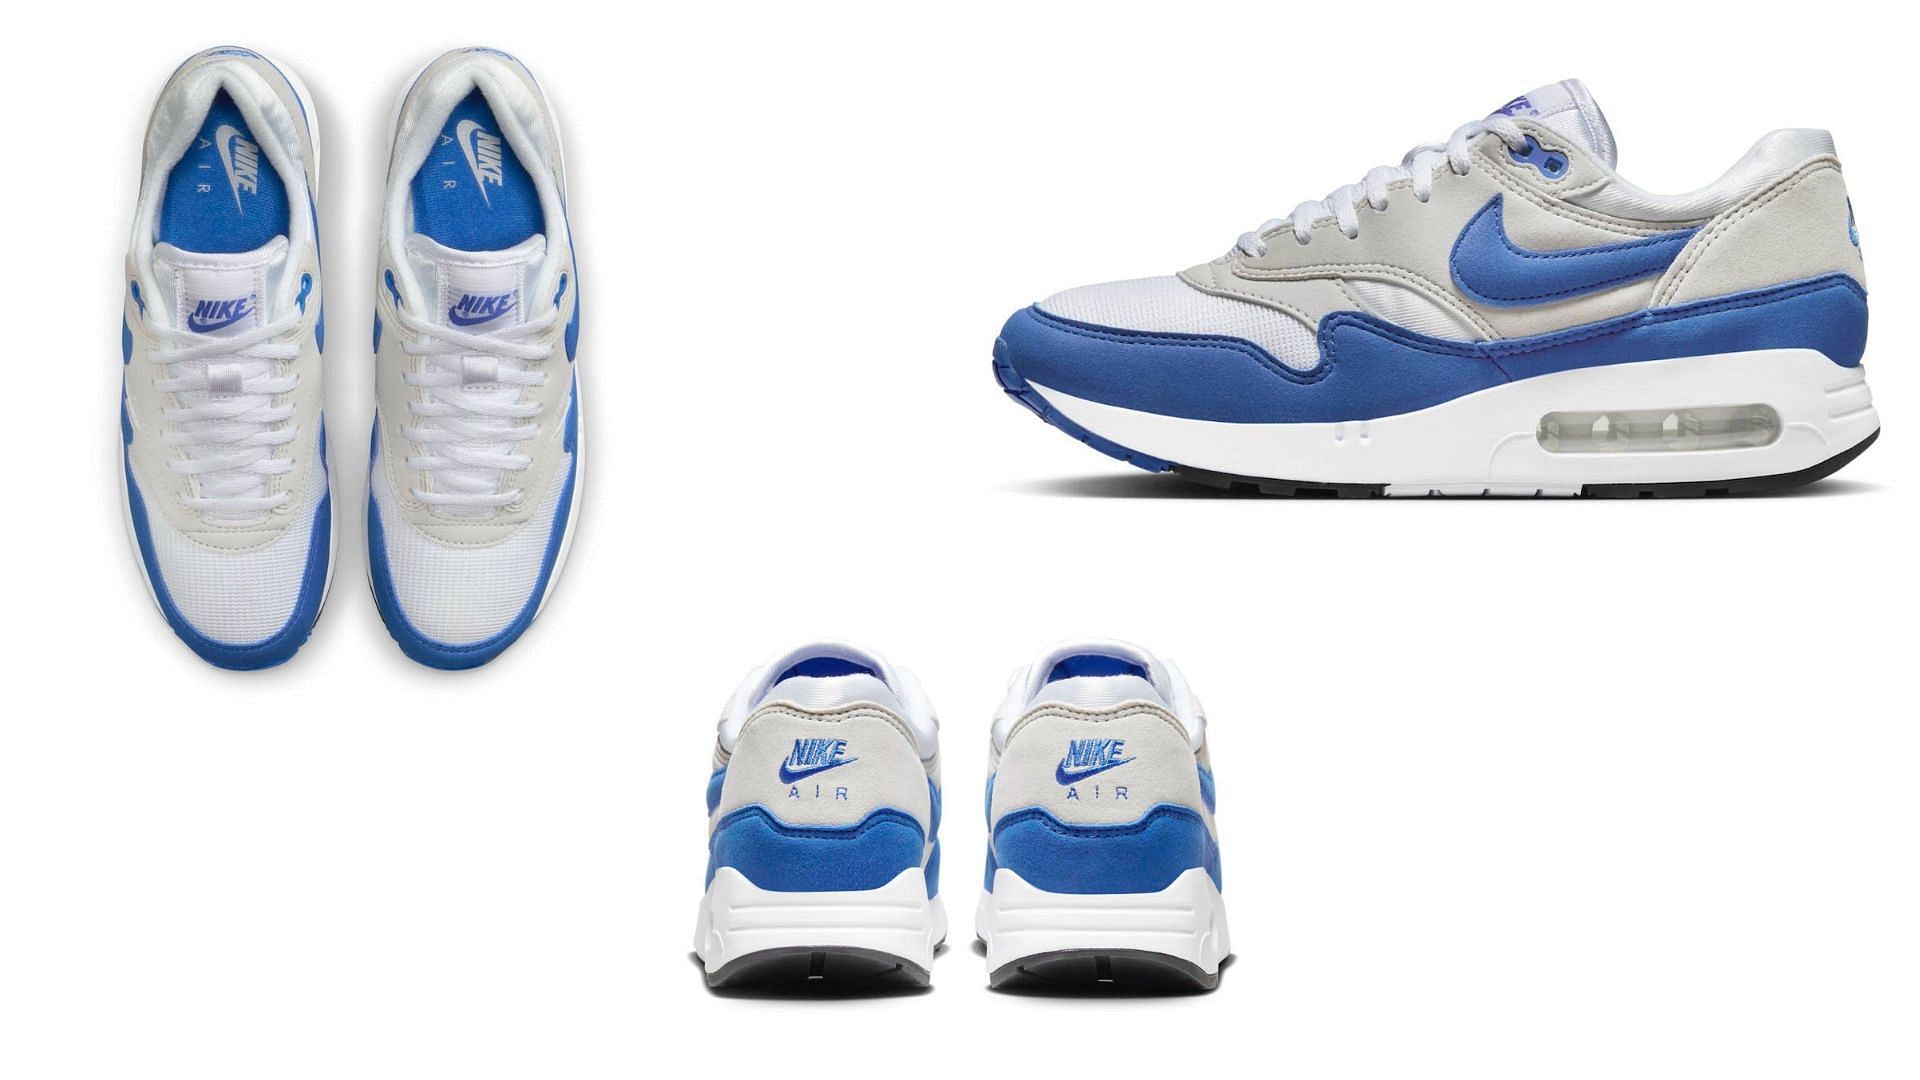 Another look at the Nike Air Max 1 &#039;86 OG Sport Royal shoes (Image via YouTube/@ragnoupdates)